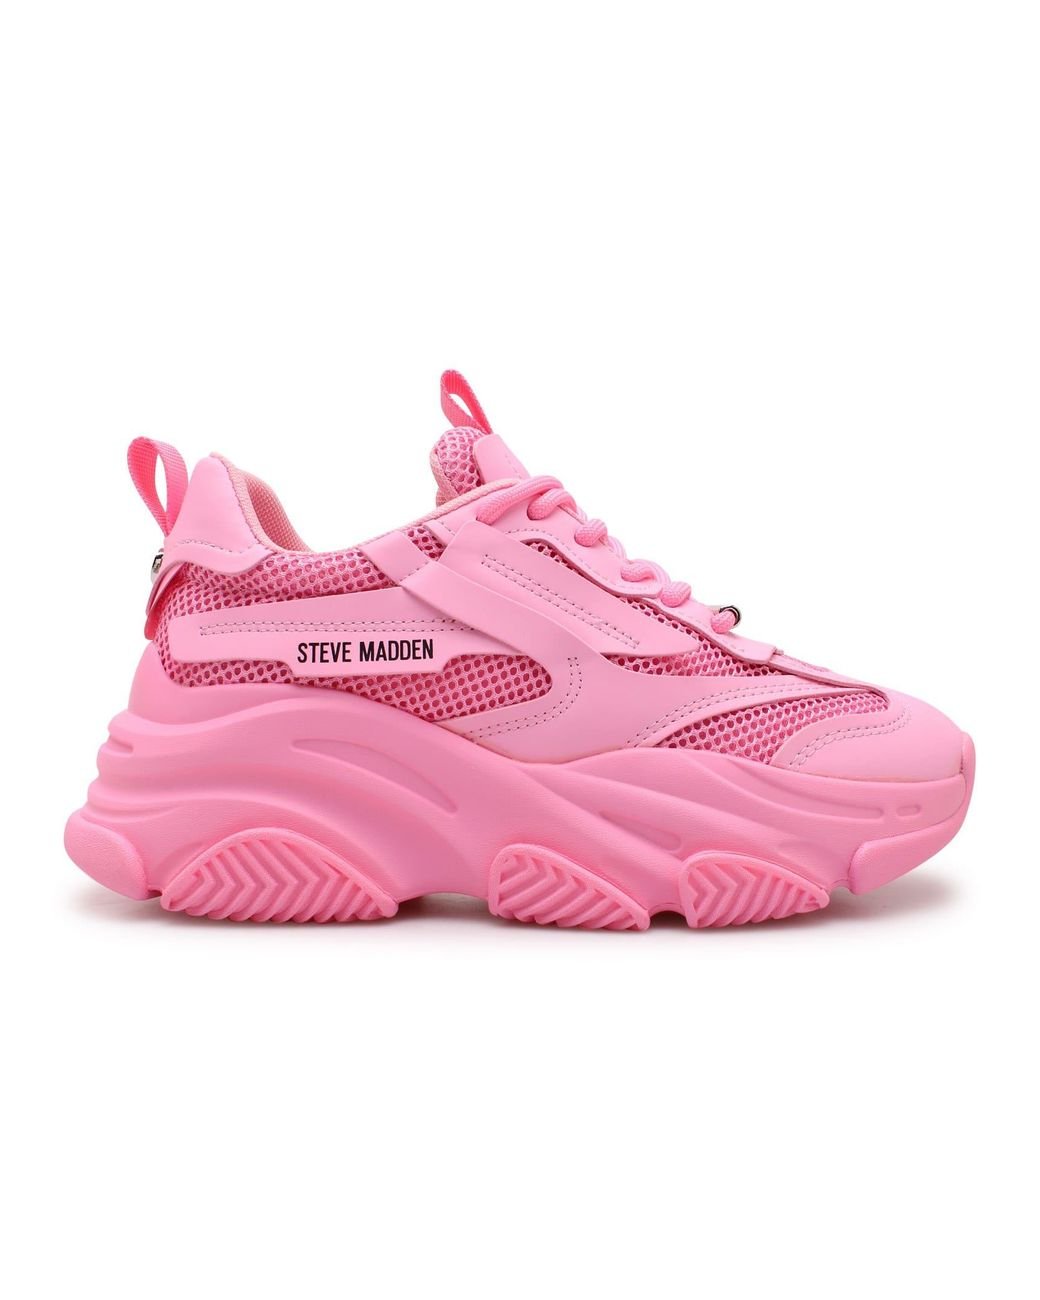 Steve Madden Possession Pink Sneakers | Lyst